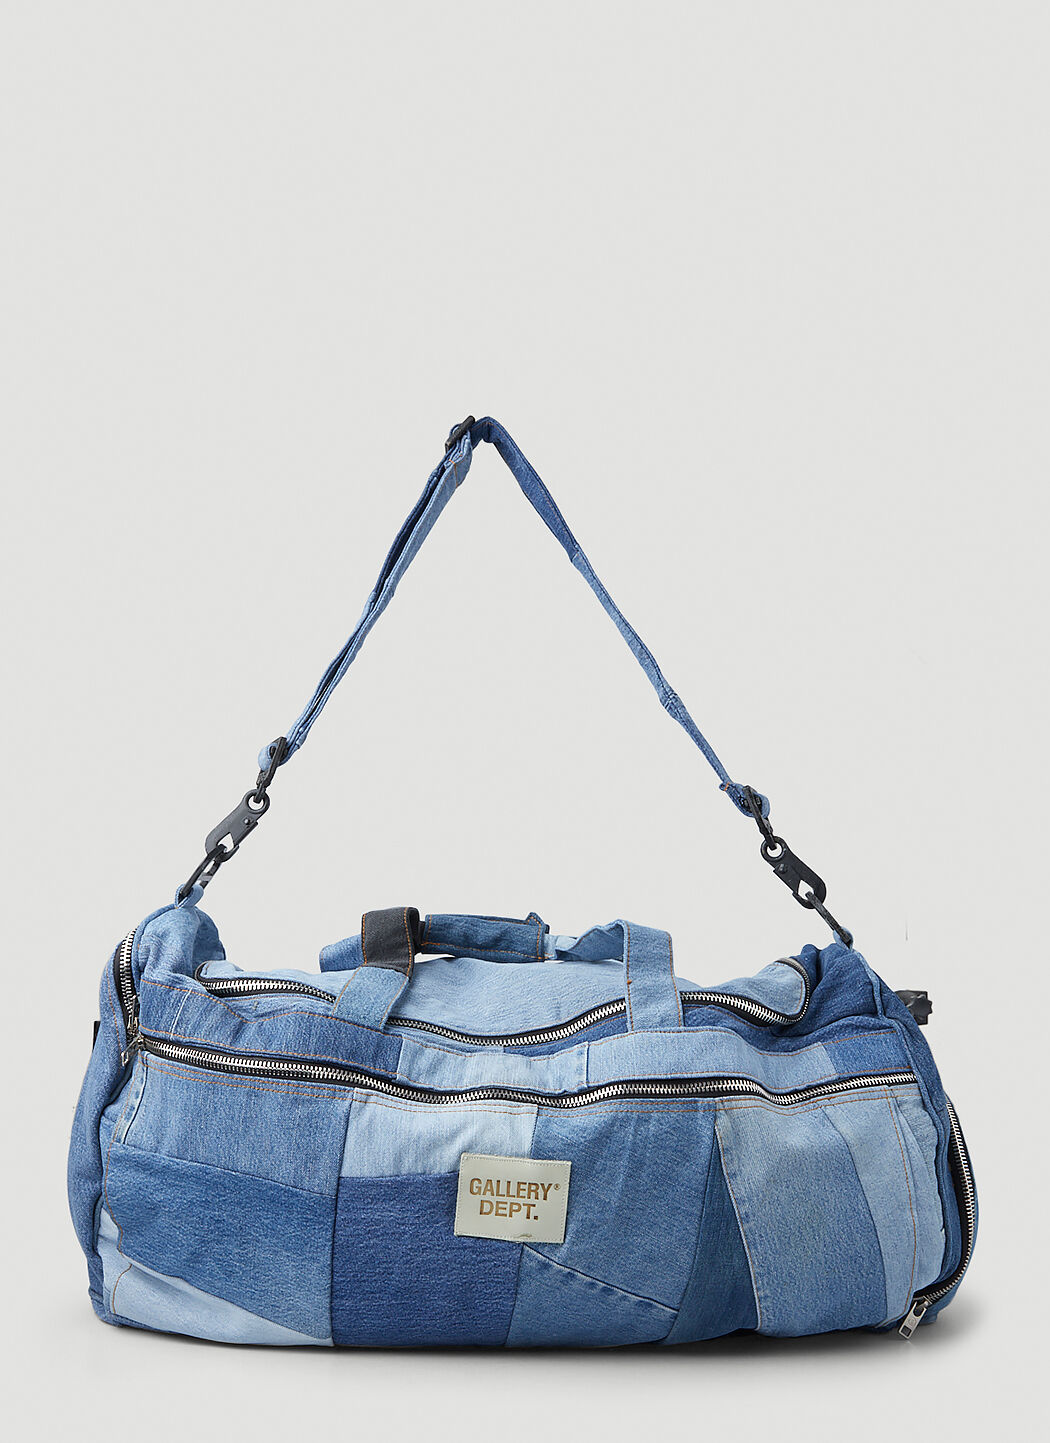 Patchwork Duffle Bag by JEVGLOBAL : r/ClothingStartups